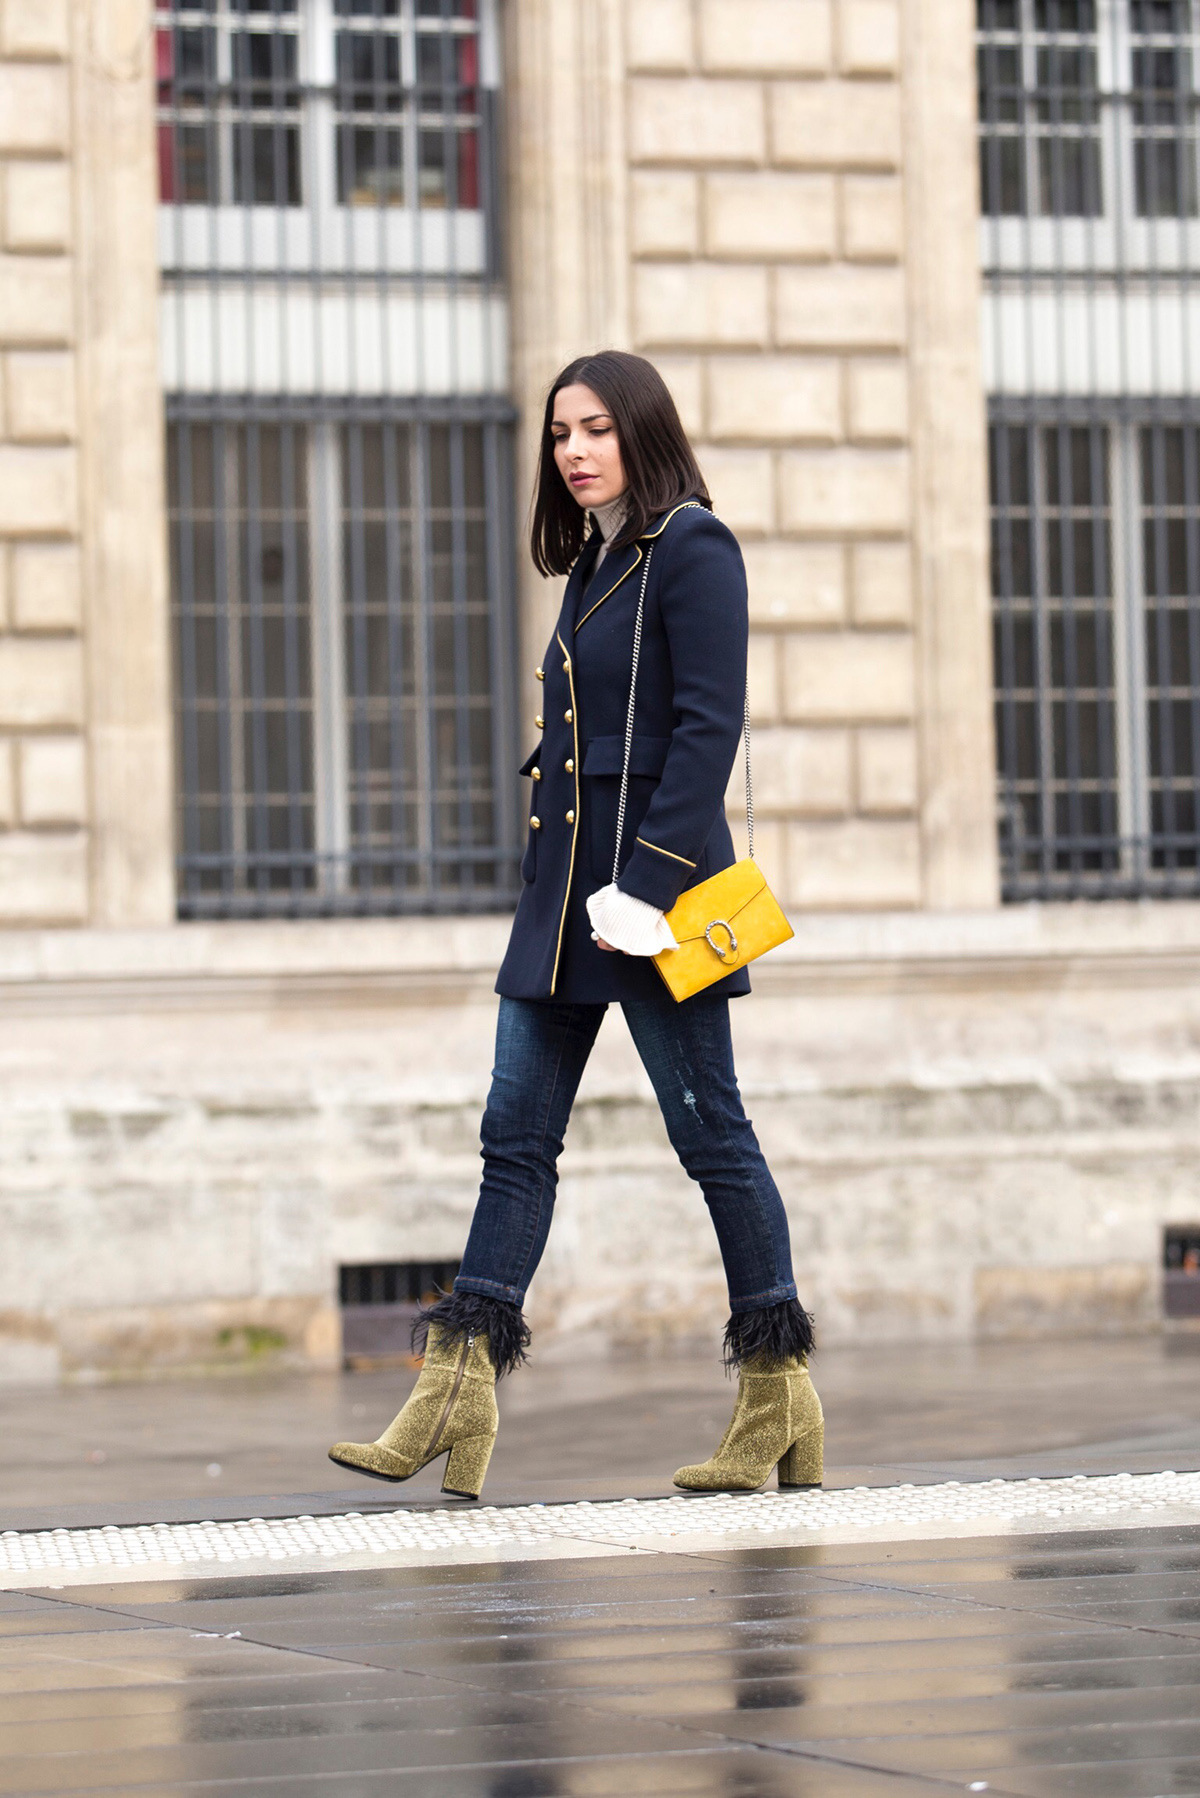 Paris street style with military coat by Fashion & Lifestyle blogger Stella Asteria